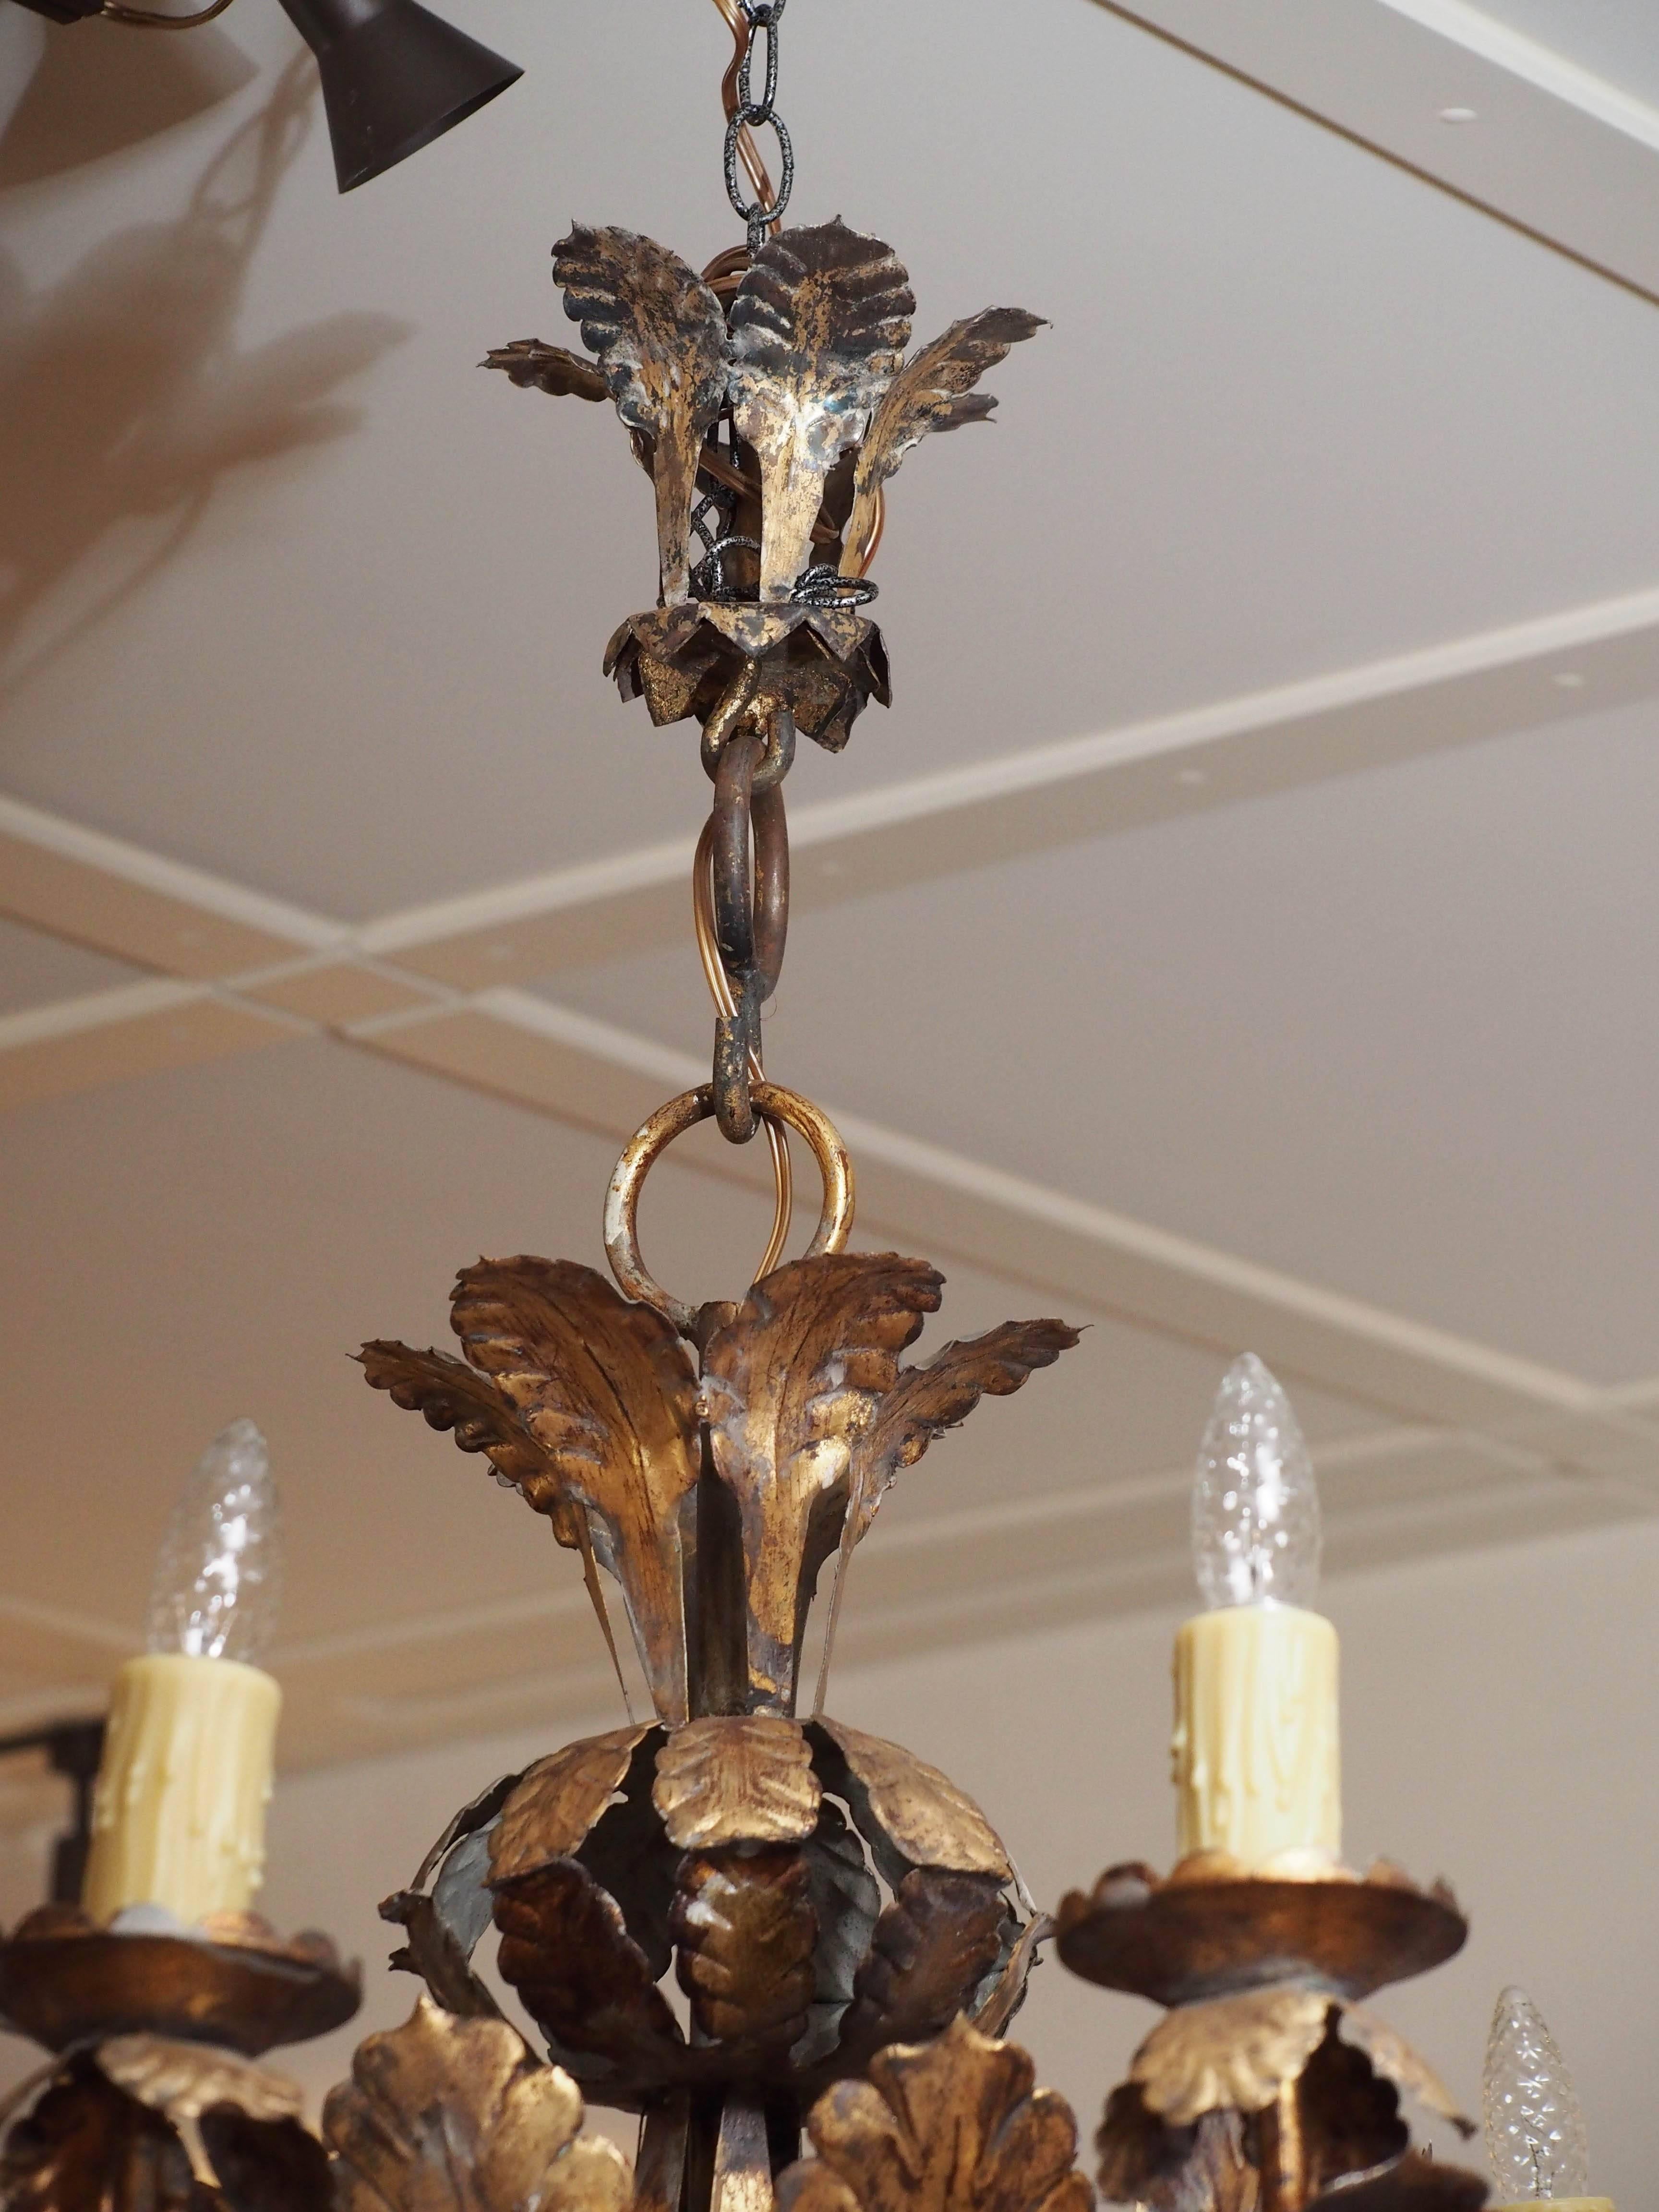 Early 20th century Italian tole nine-arm chandelier with worn gold leafing and wax sleeves. This fixture has been recently re-wired by Wirthmore Antiques, circa 1920.